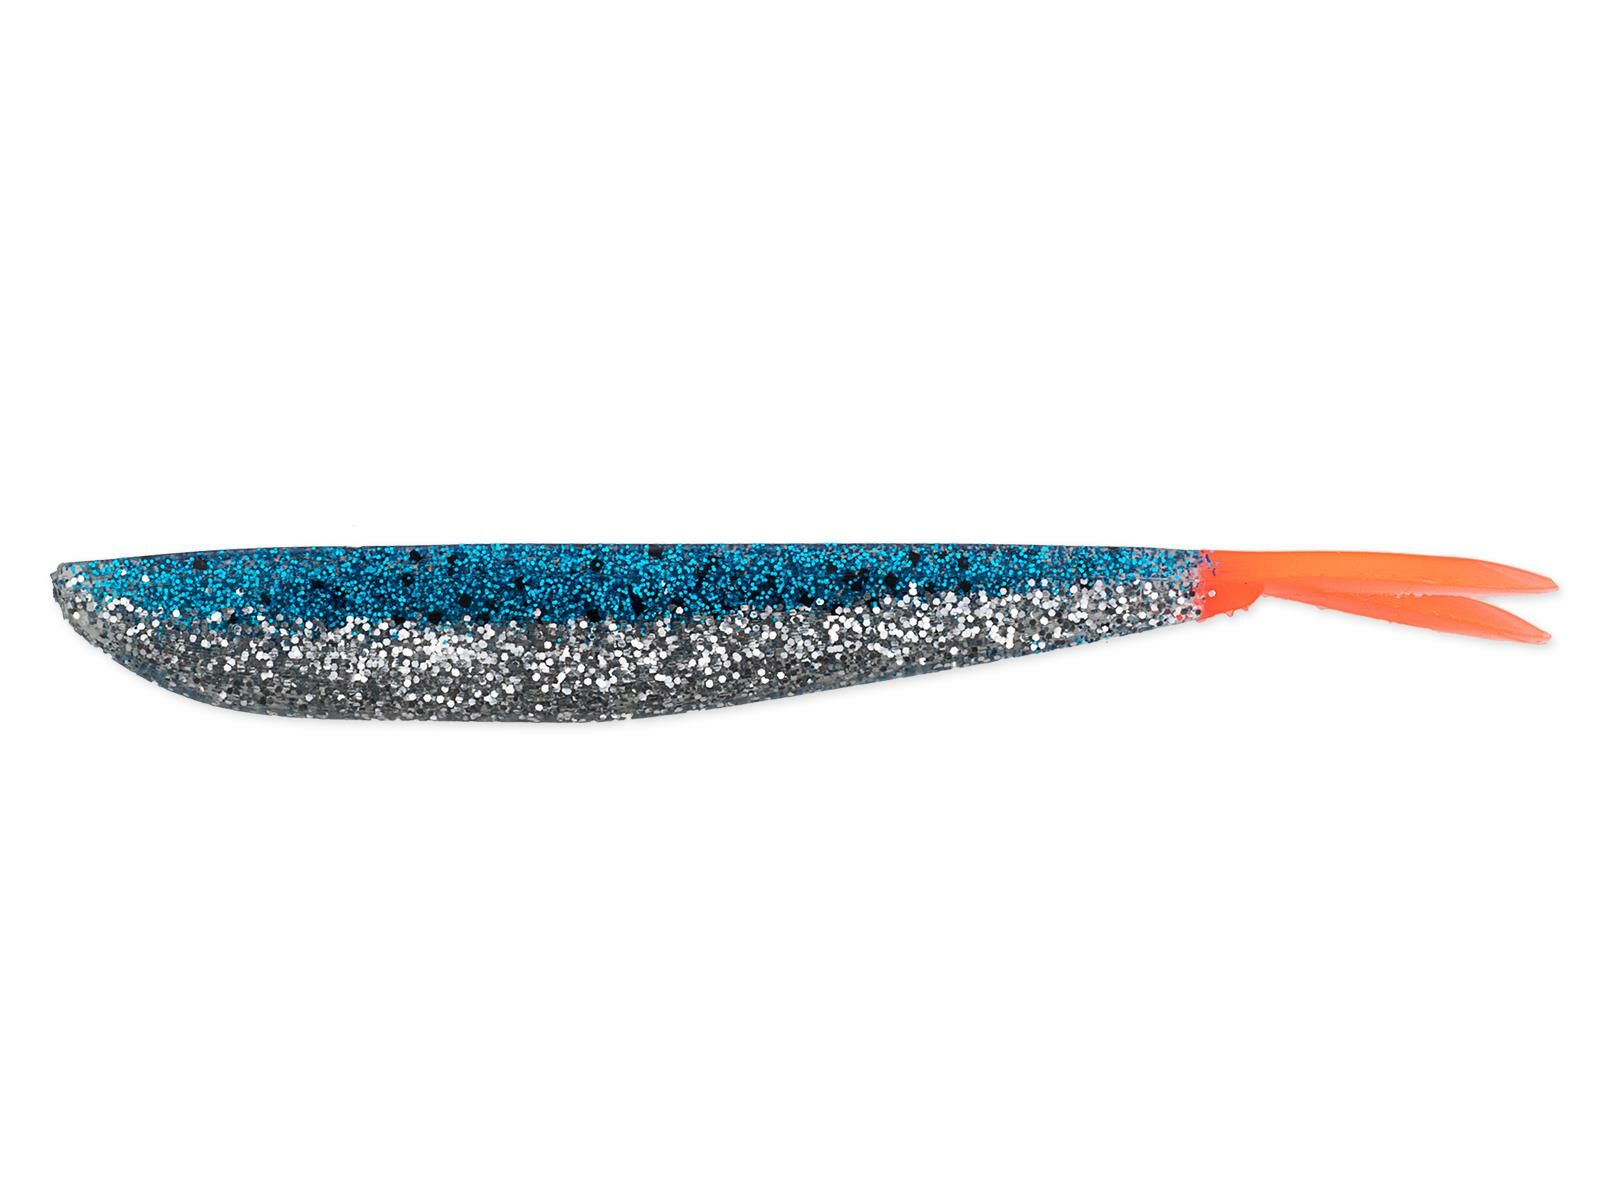 4" Fin-S Fish (Tail Colors) - Blue Ice FT